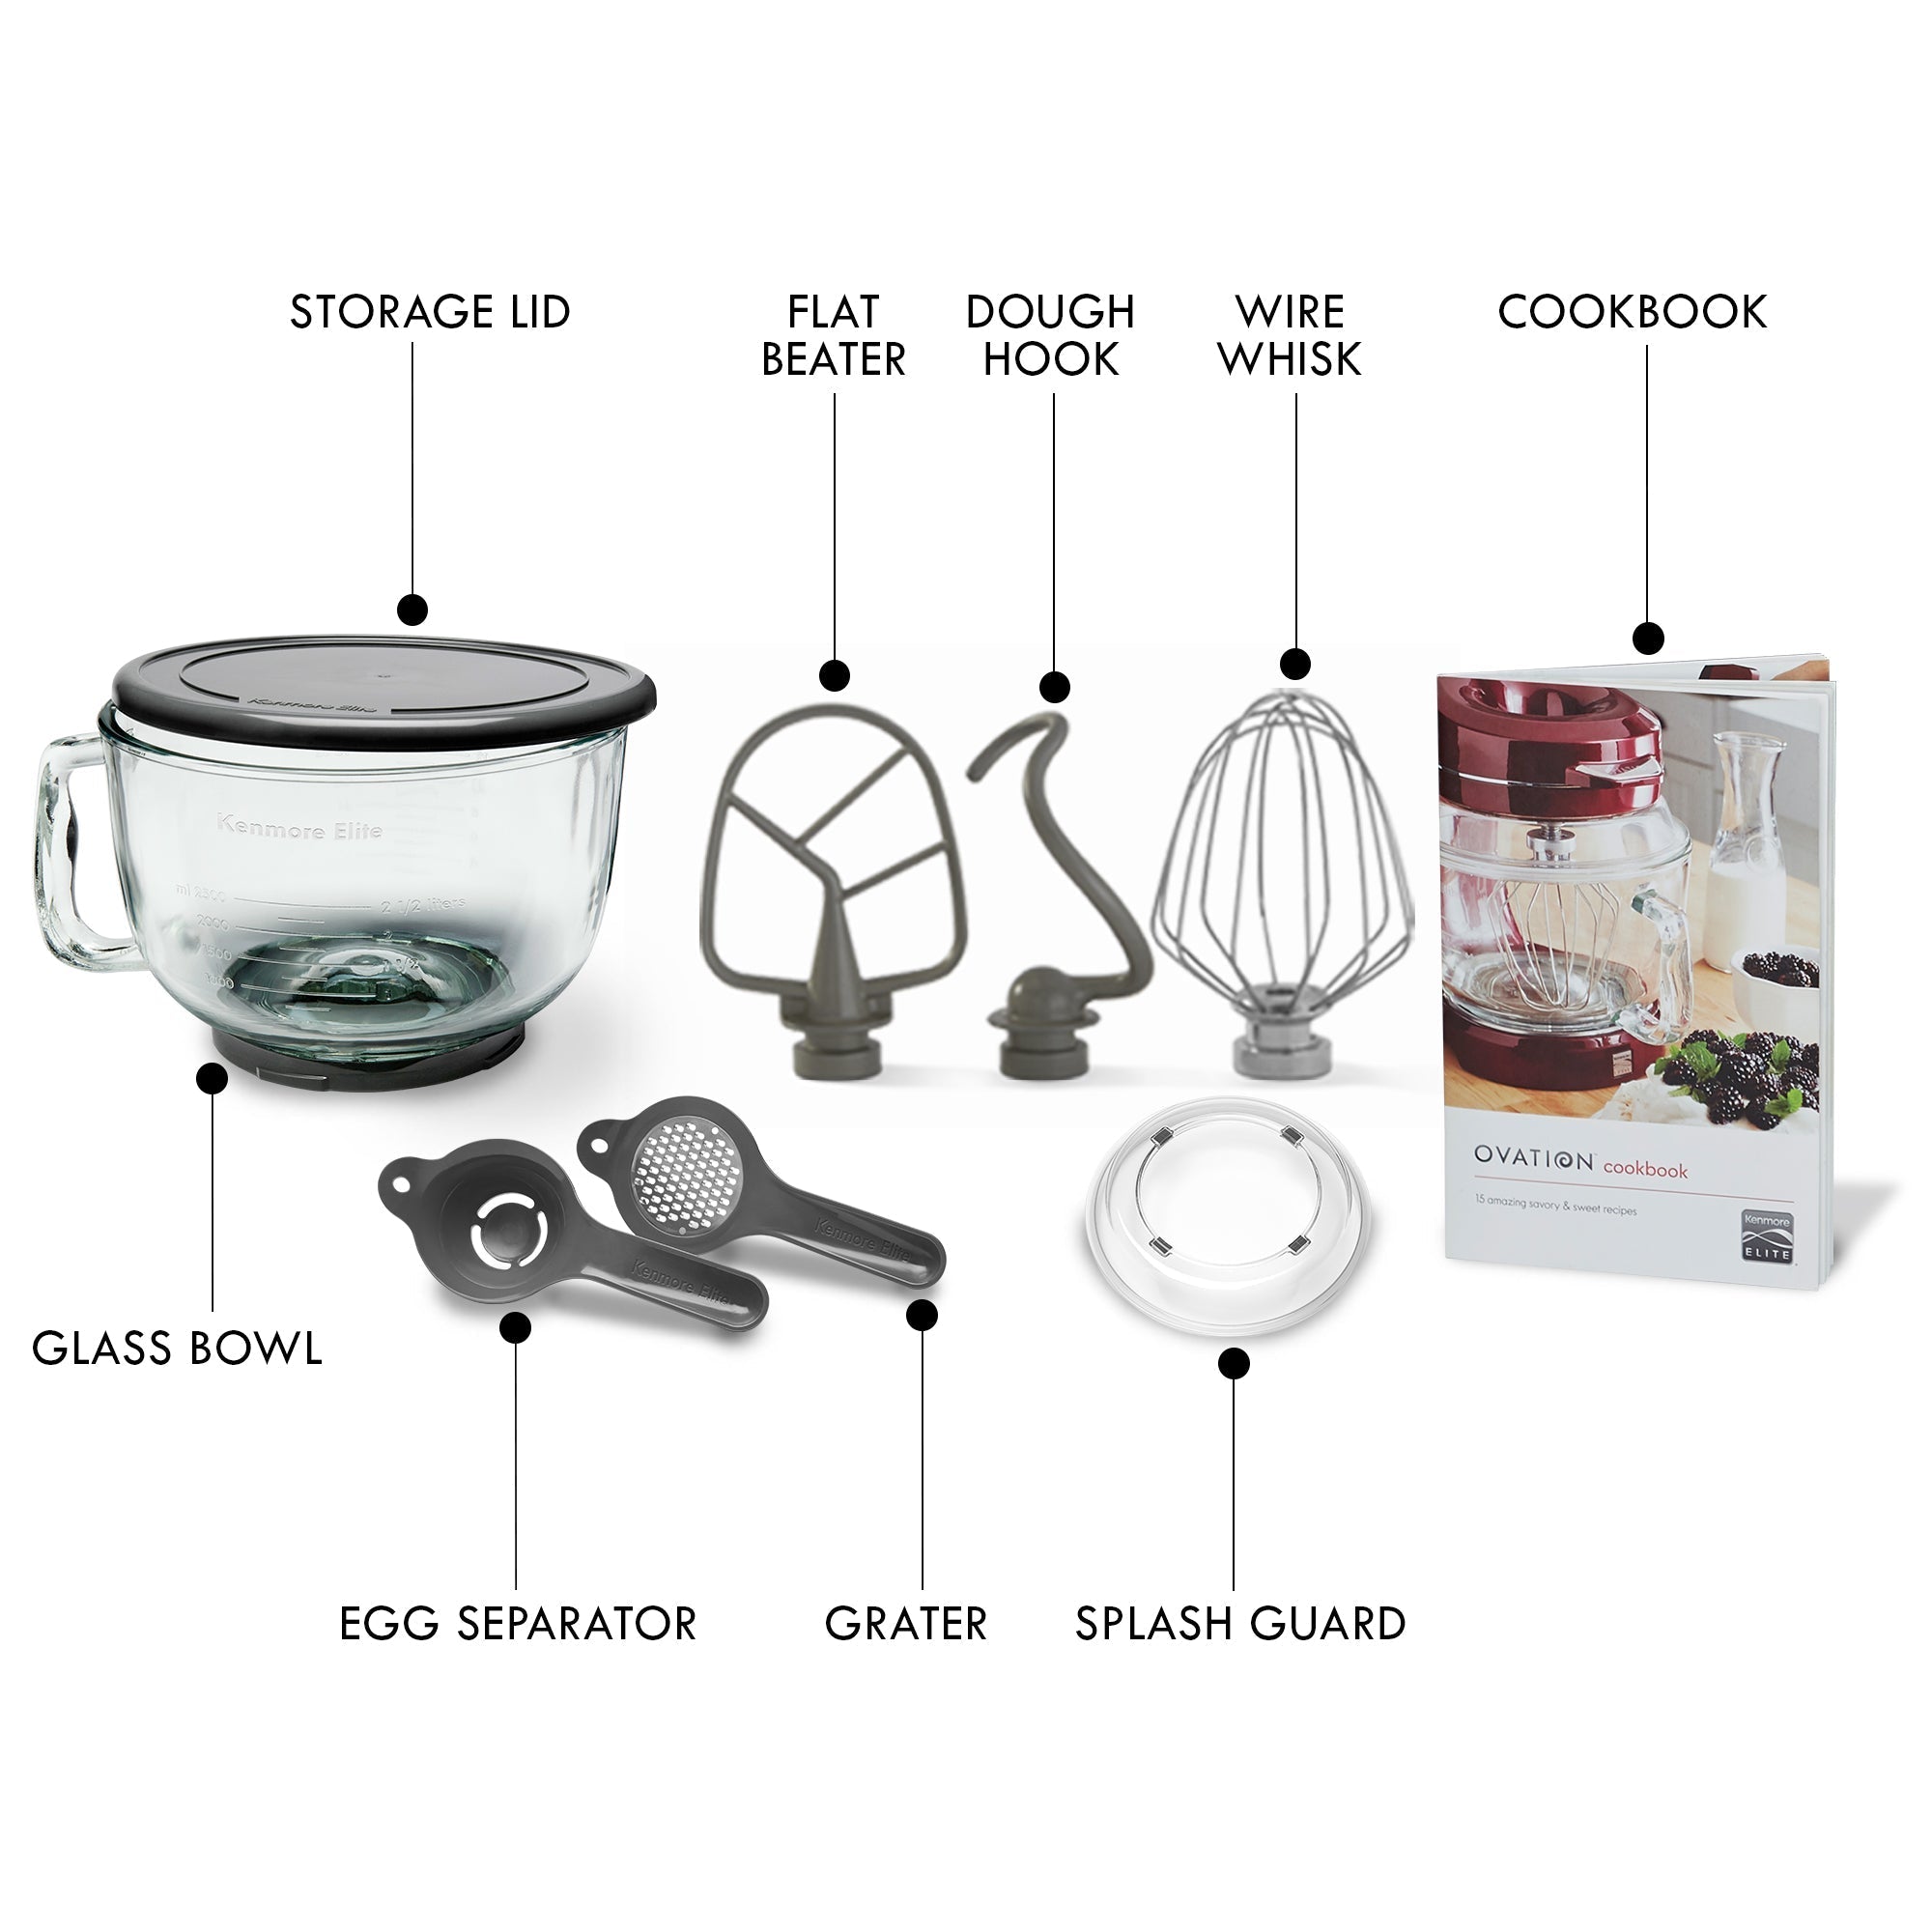 Kenmore Elite Ovation mixer with accessories and attachments on a white background, labeled (from top left): Storage lid; flat beater; dough hook; wire whisk; cookbook; glass bowl; egg separator; grater; splash guard